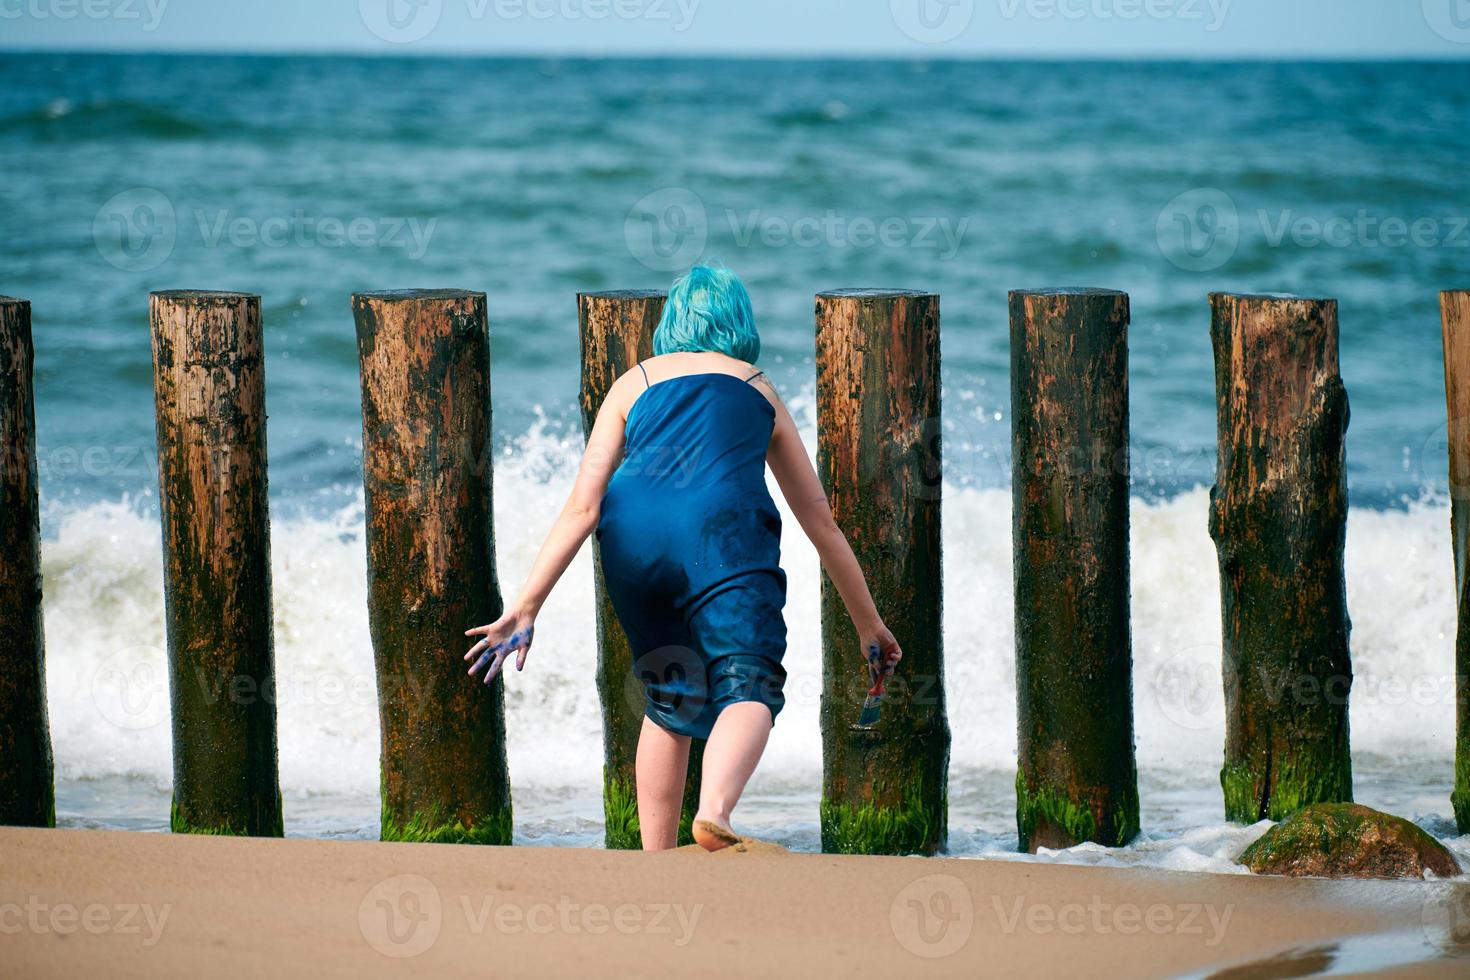 Blue-haired woman performance artist in blue dress standing on beach holding paint brush, back view photo